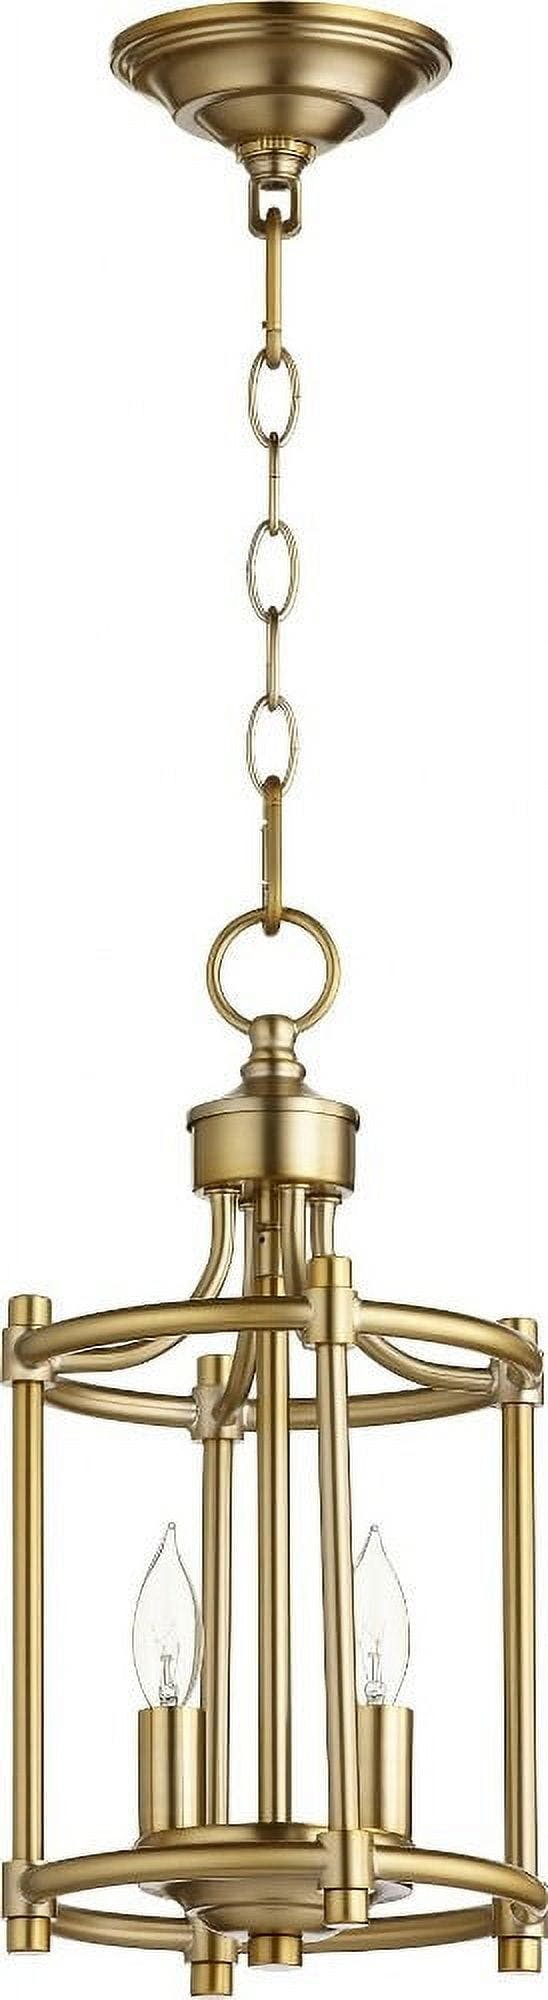 Elegant Aged Brass Drum Pendant Light with Crystal Accents, 8"W x 16"H